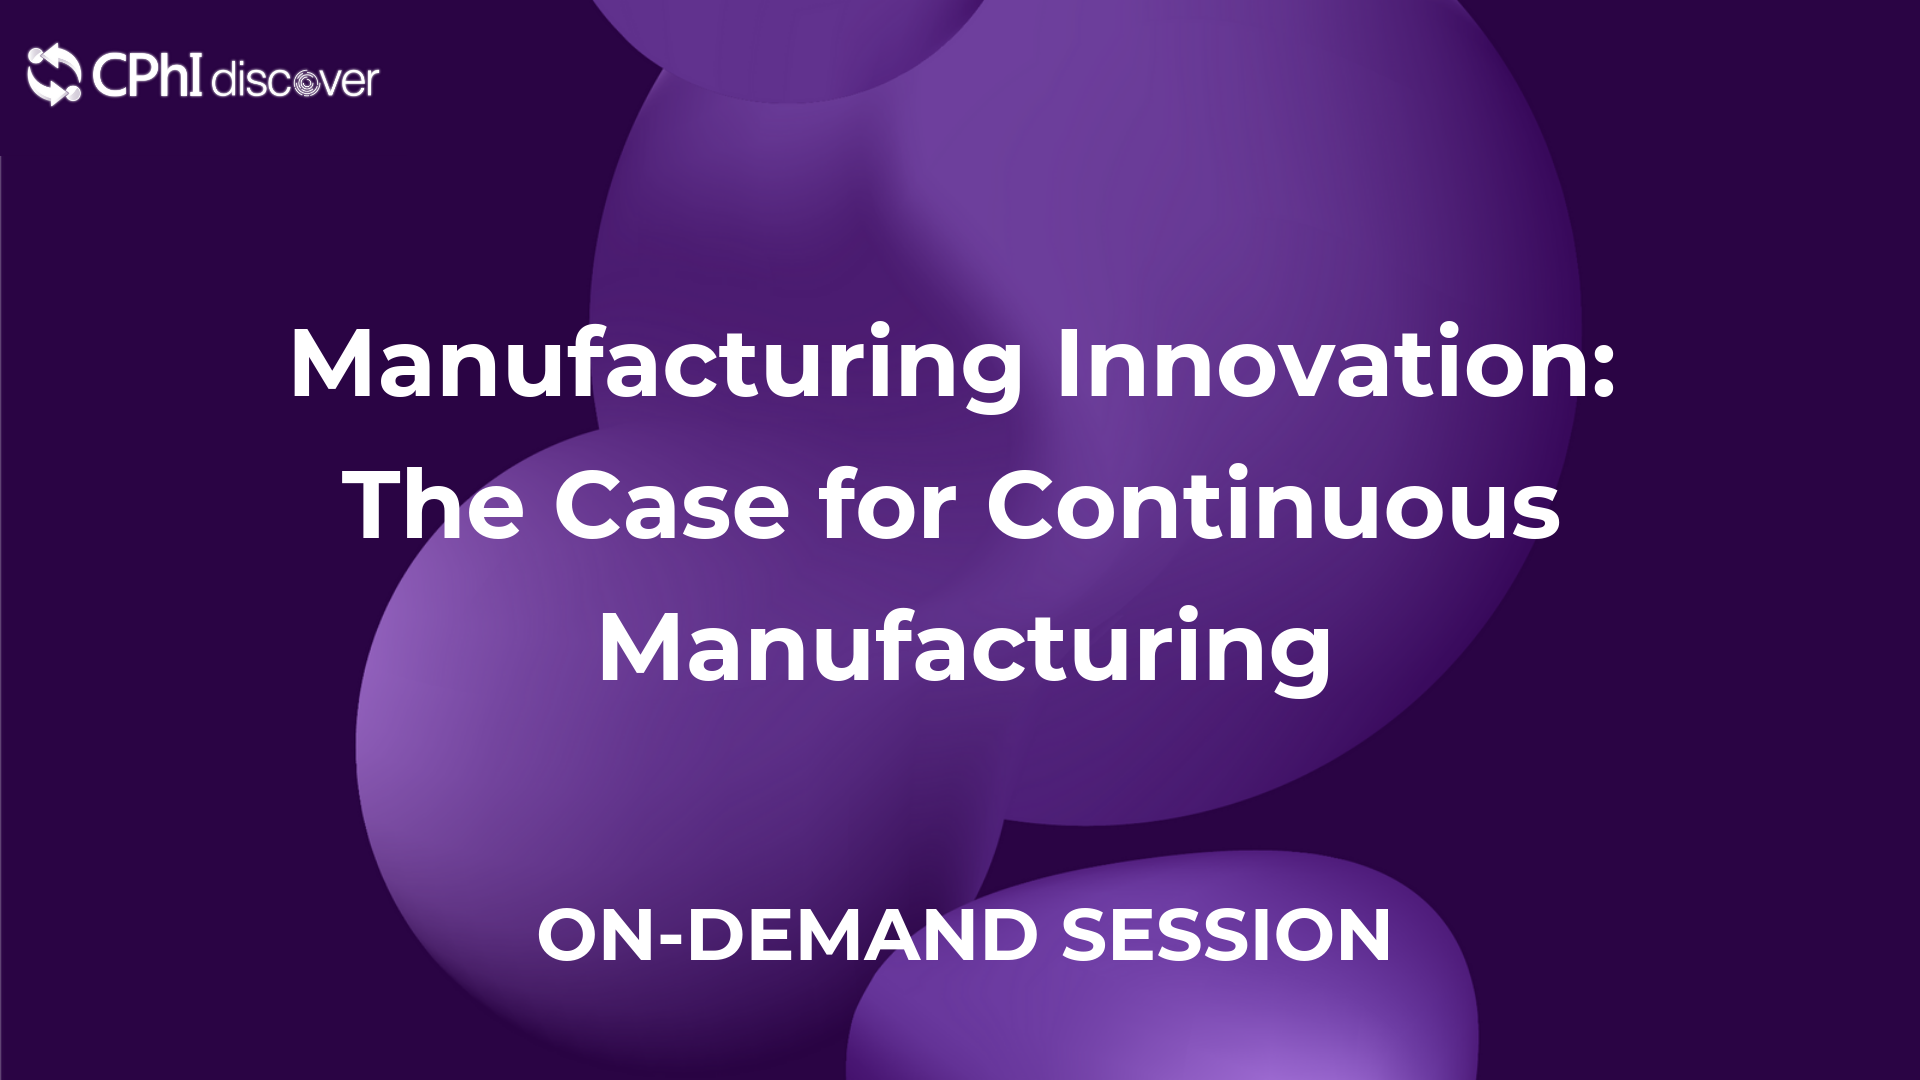 Manufacturing Innovation: The Case for Continuous Manufacturing